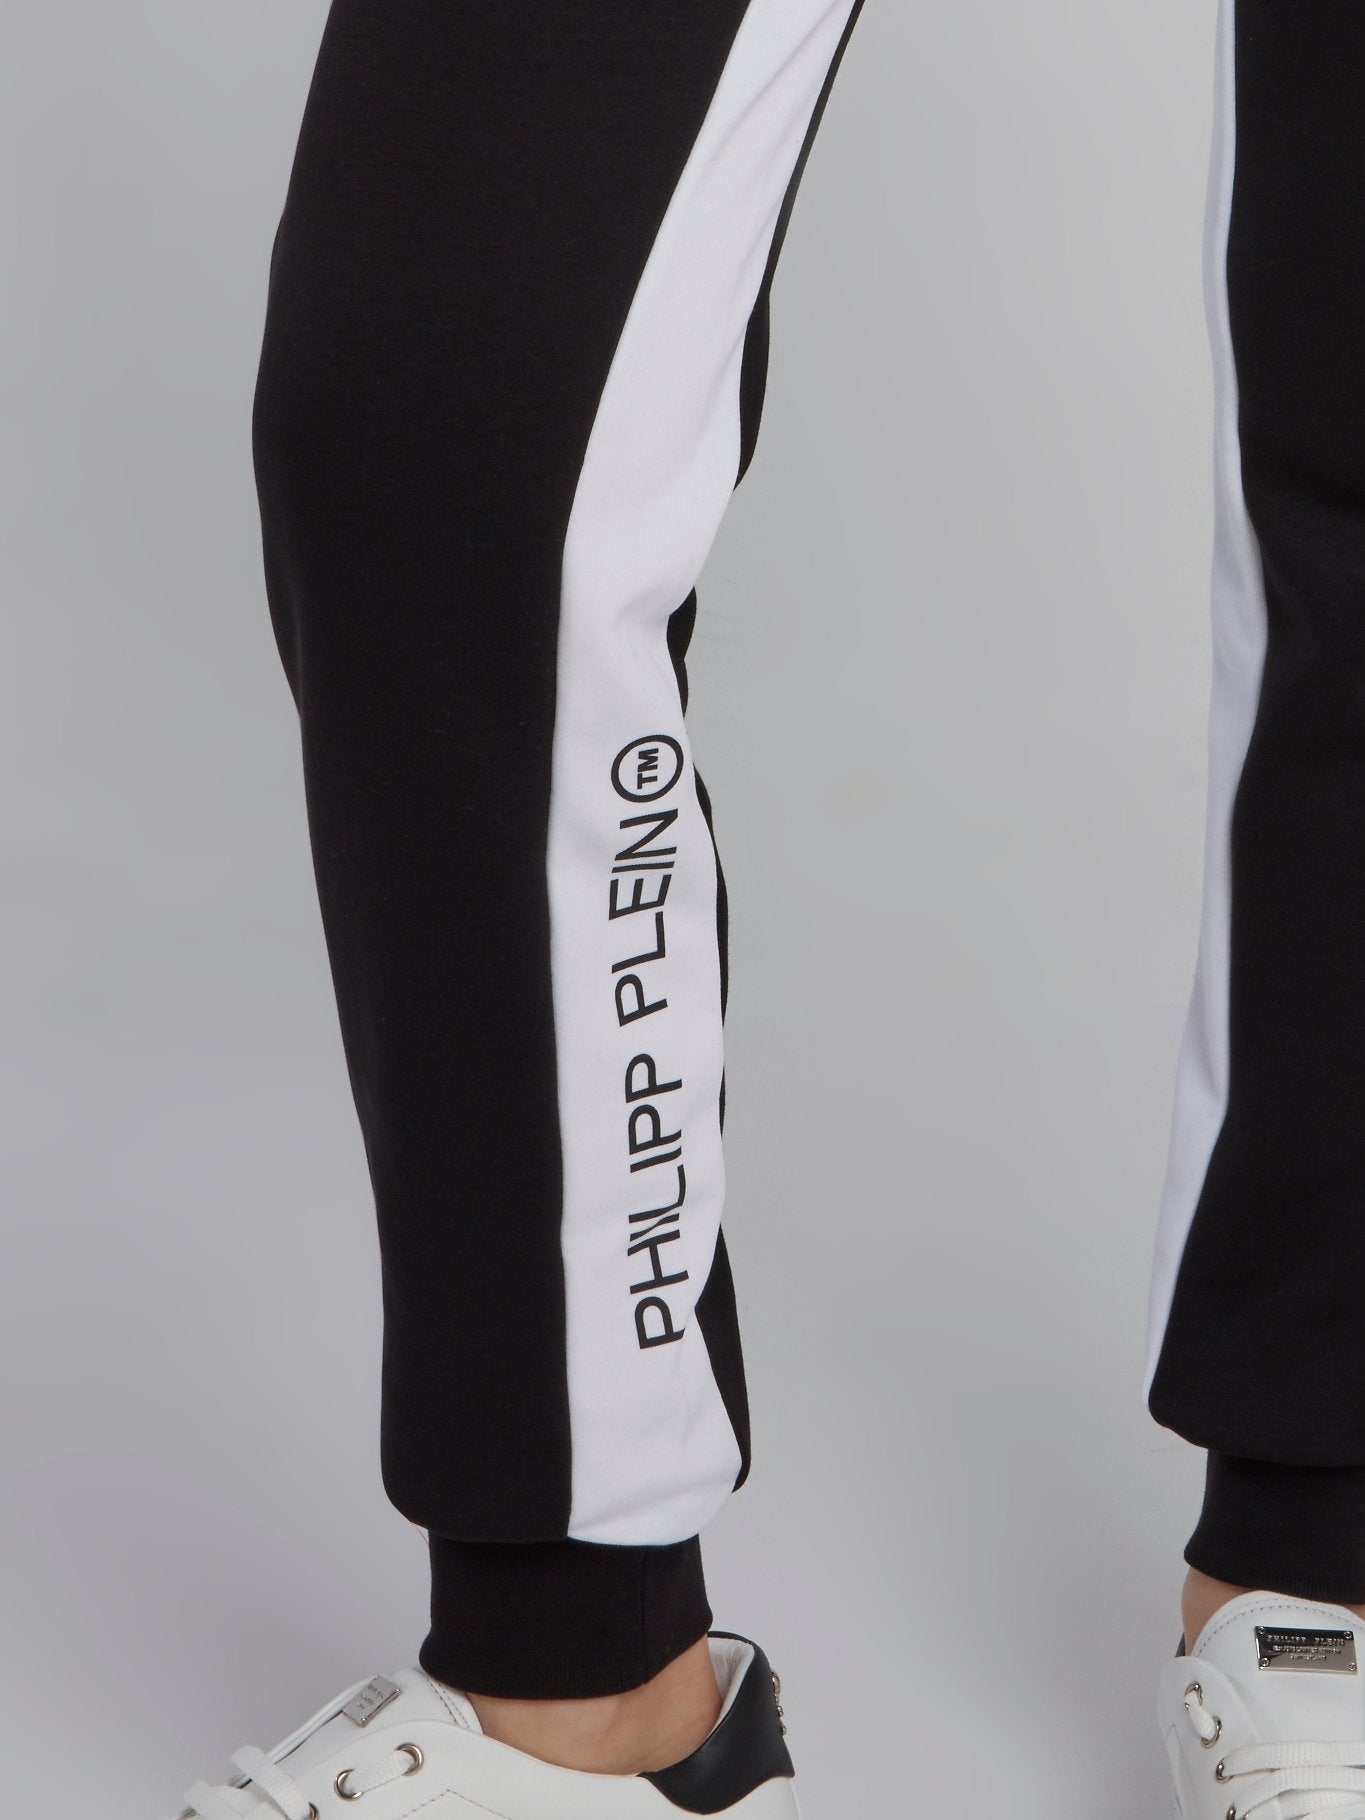 Black Contrast Drawstring Active Trousers